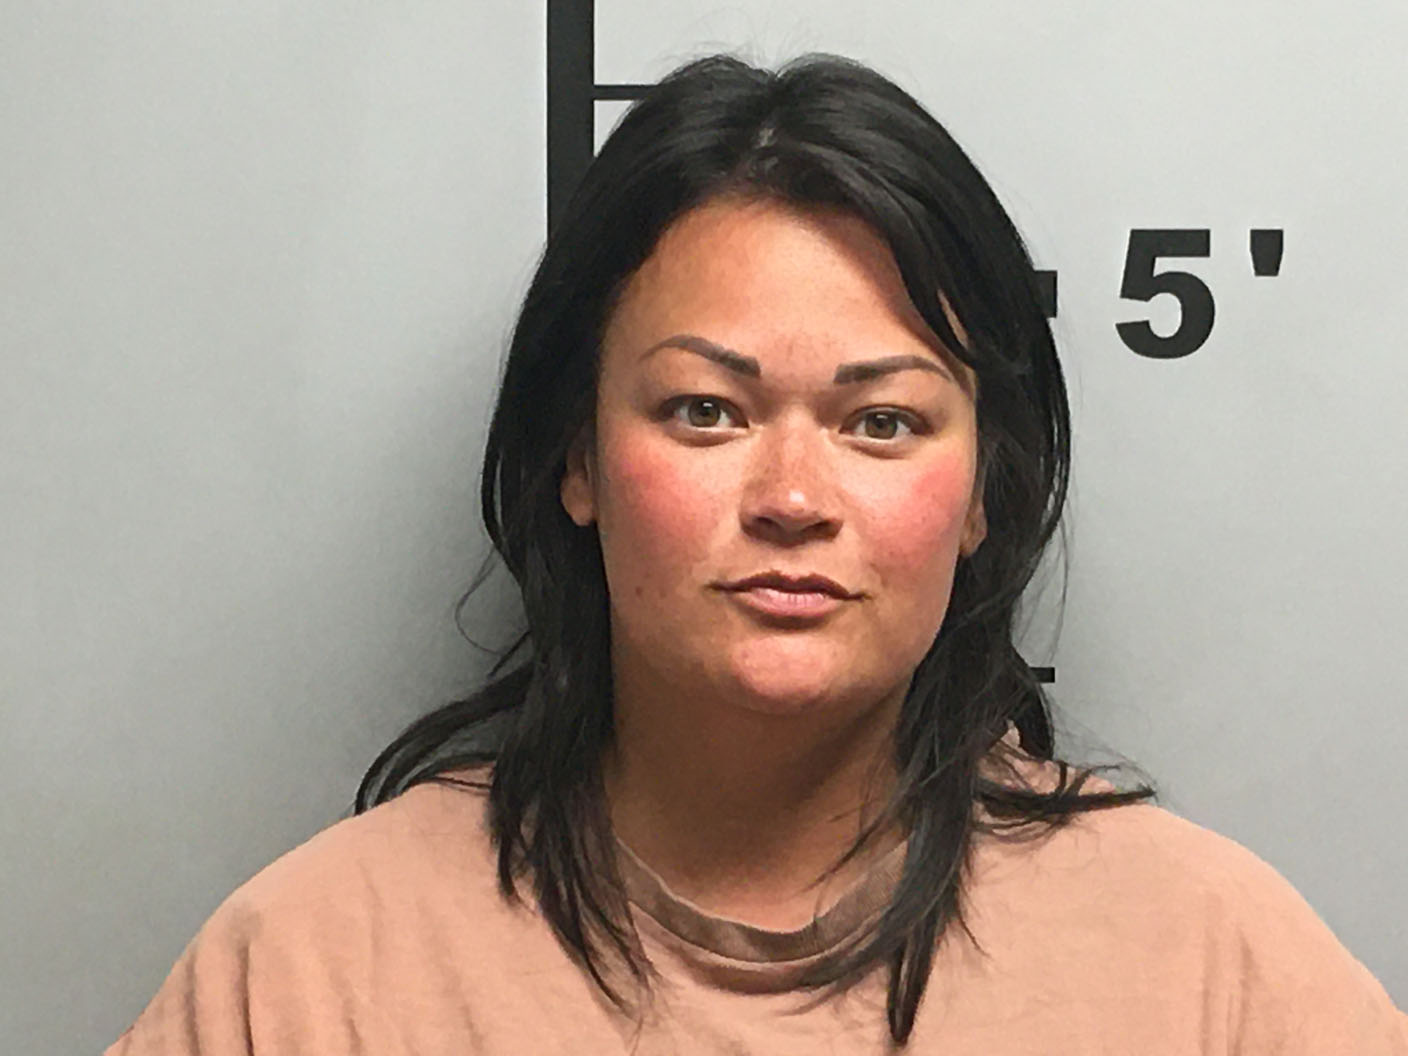 Rogers woman arrested, accused of having sex with 15-year-old image picture